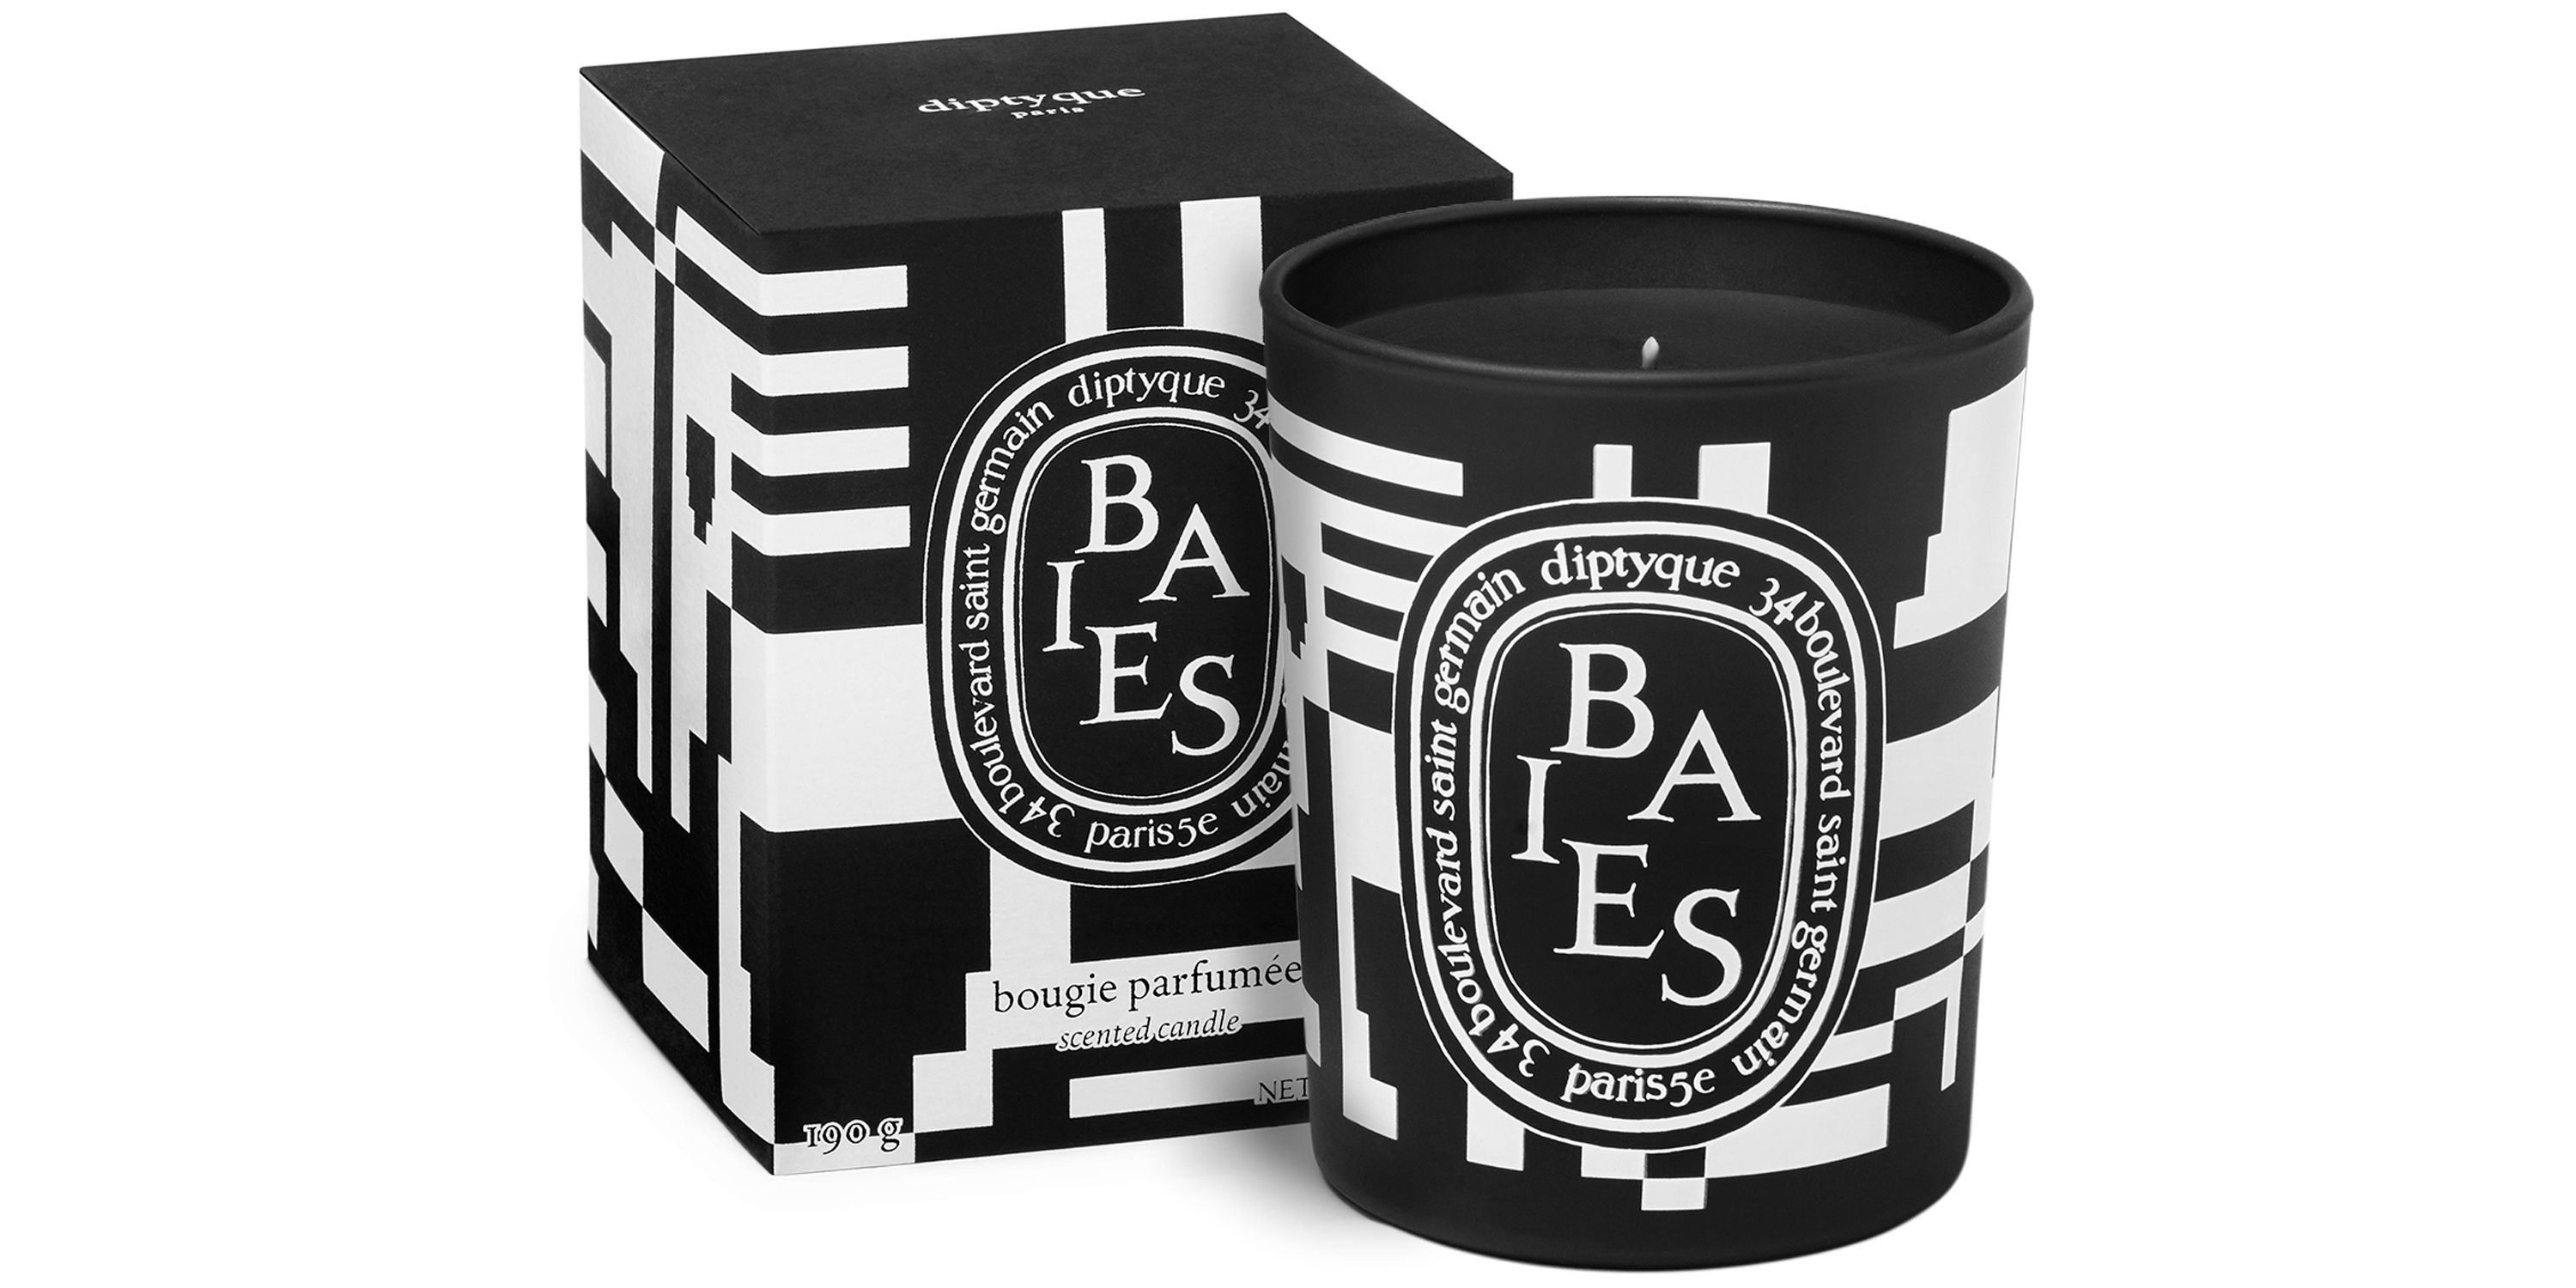 Diptyque Is Launching An Exclusive Candle For Black Friday